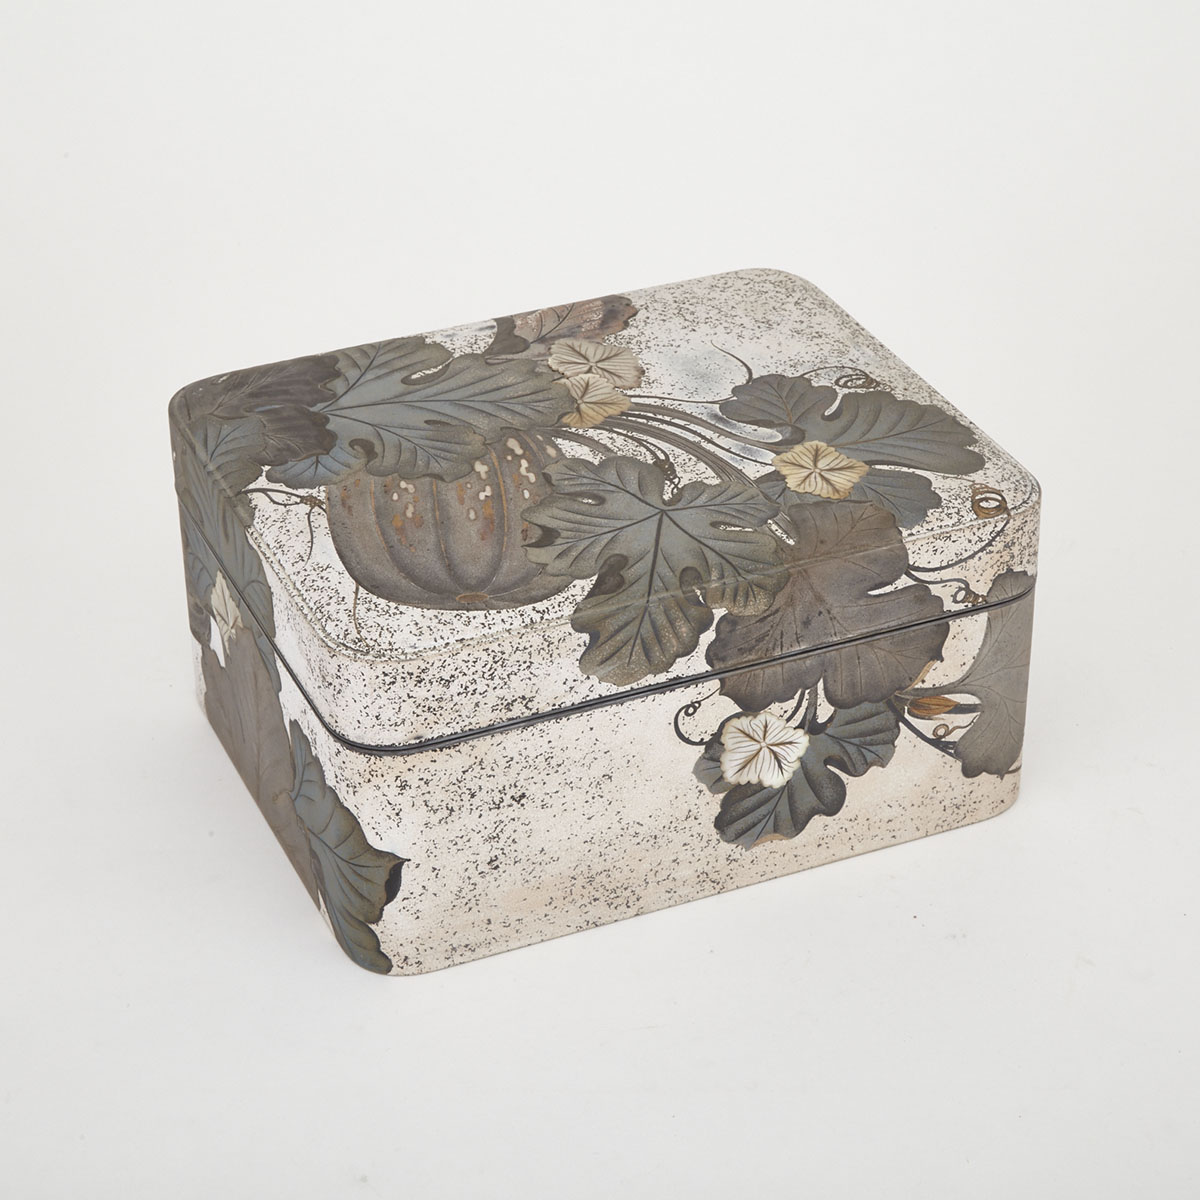 Japanese Lacquer Box with Mother of Pearl Inlays, Early 20th Century